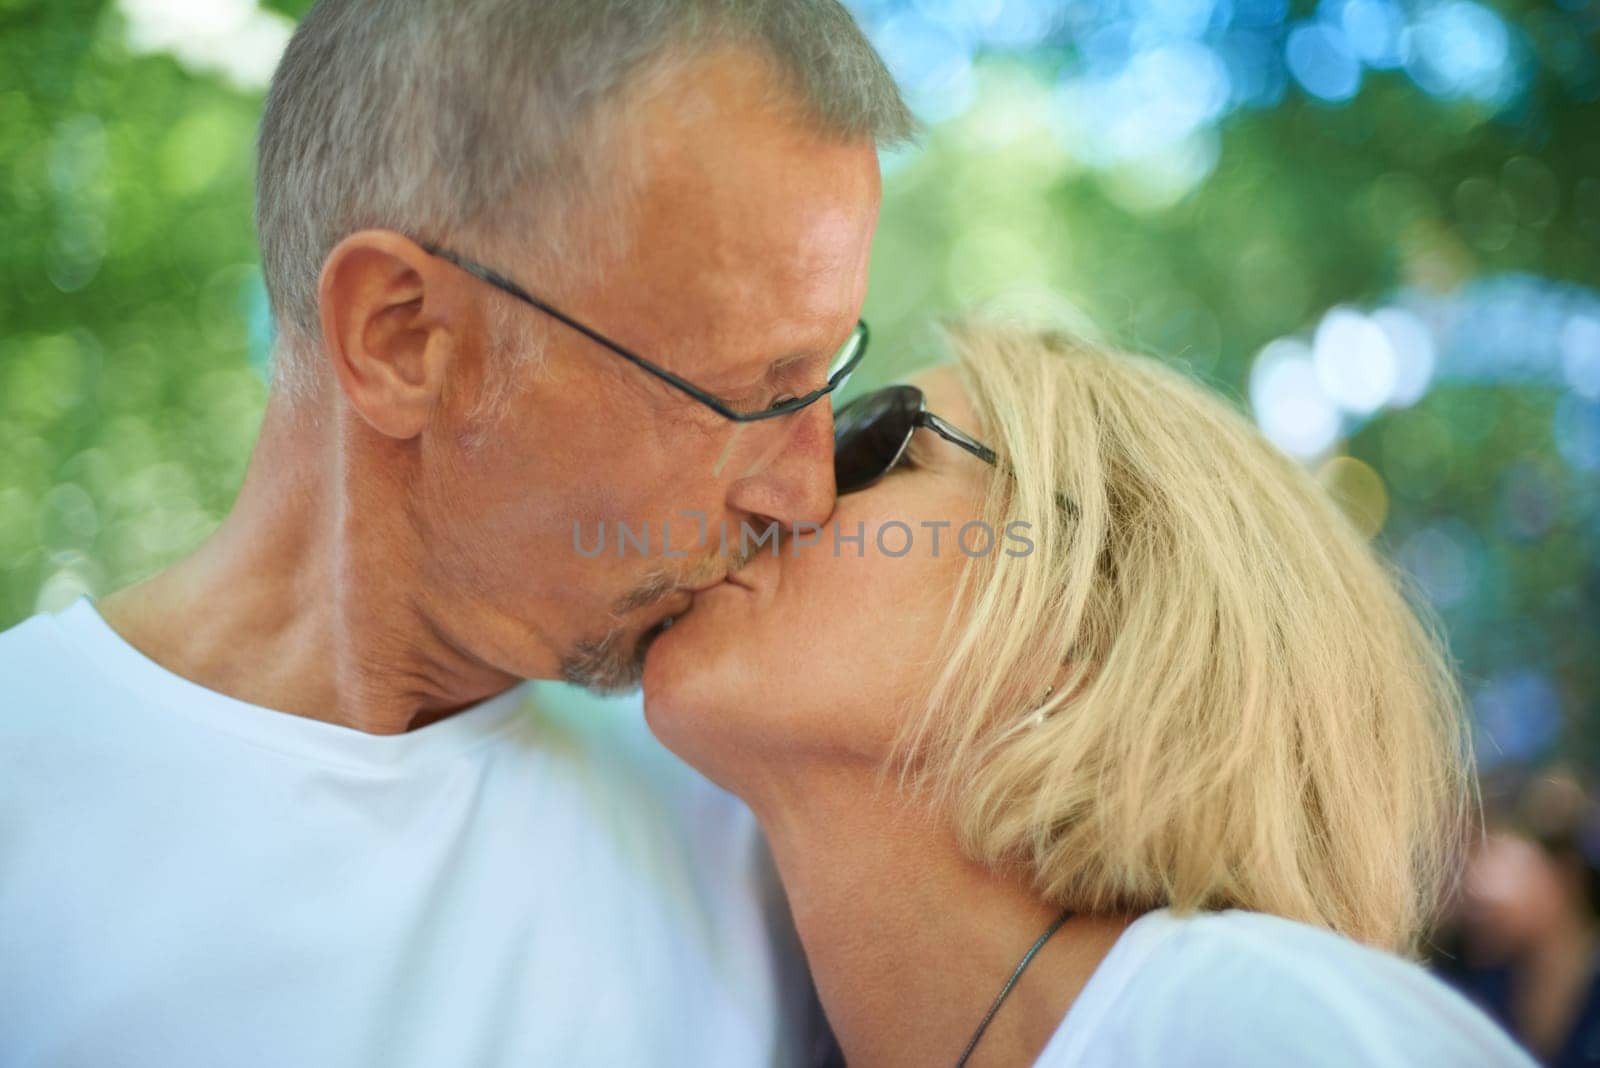 Keeping the romance alive. an affectionate mature couple at an outdoor festival